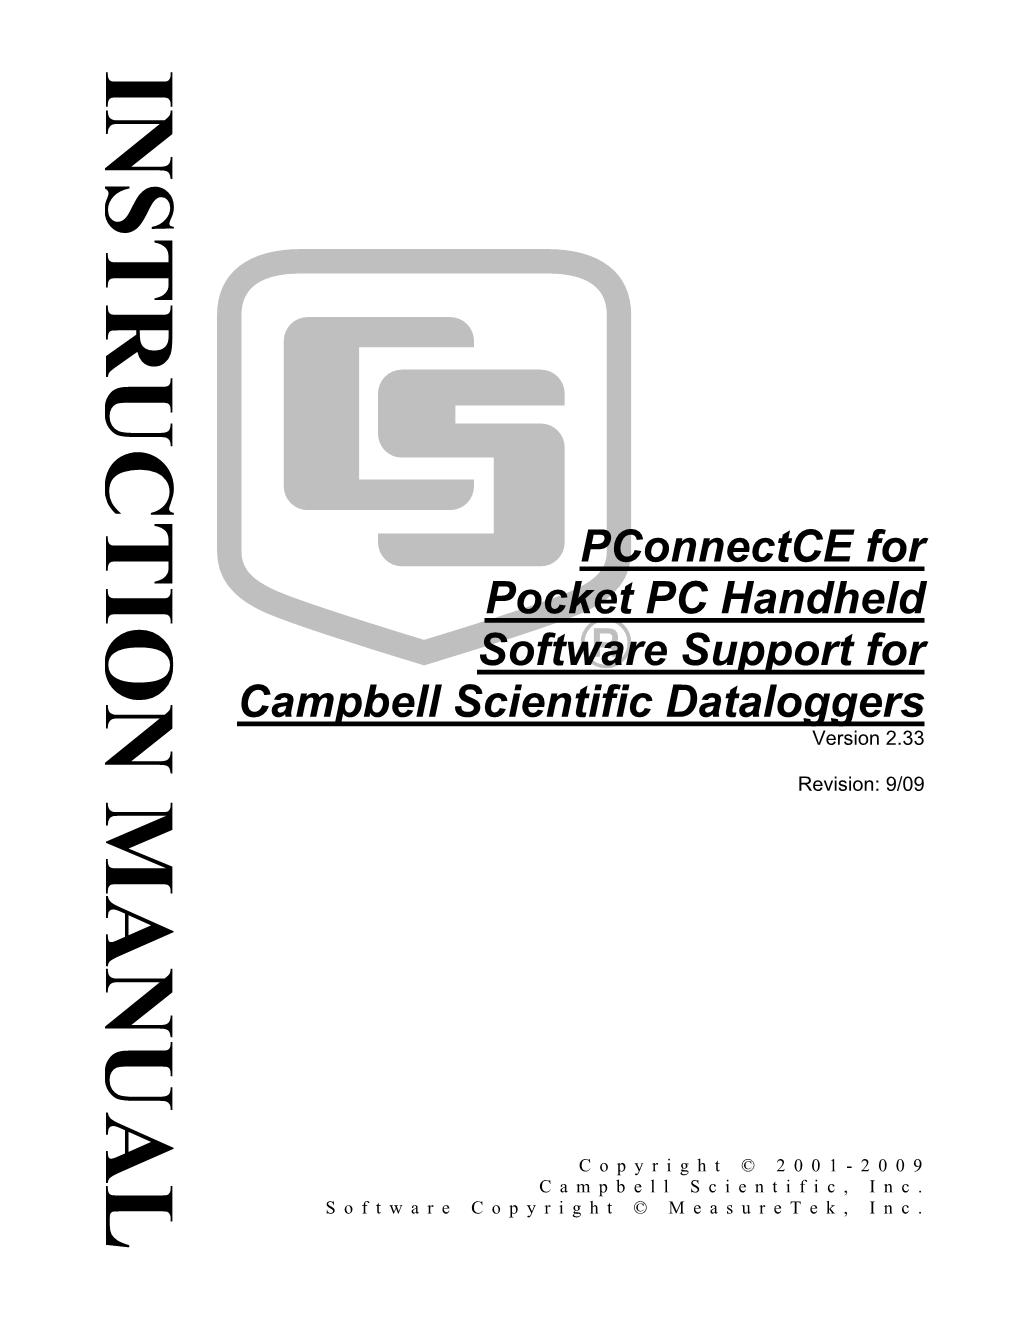 Pconnectce for Pocket PC Handheld Software Support for Campbell Scientific Dataloggers Version 2.33